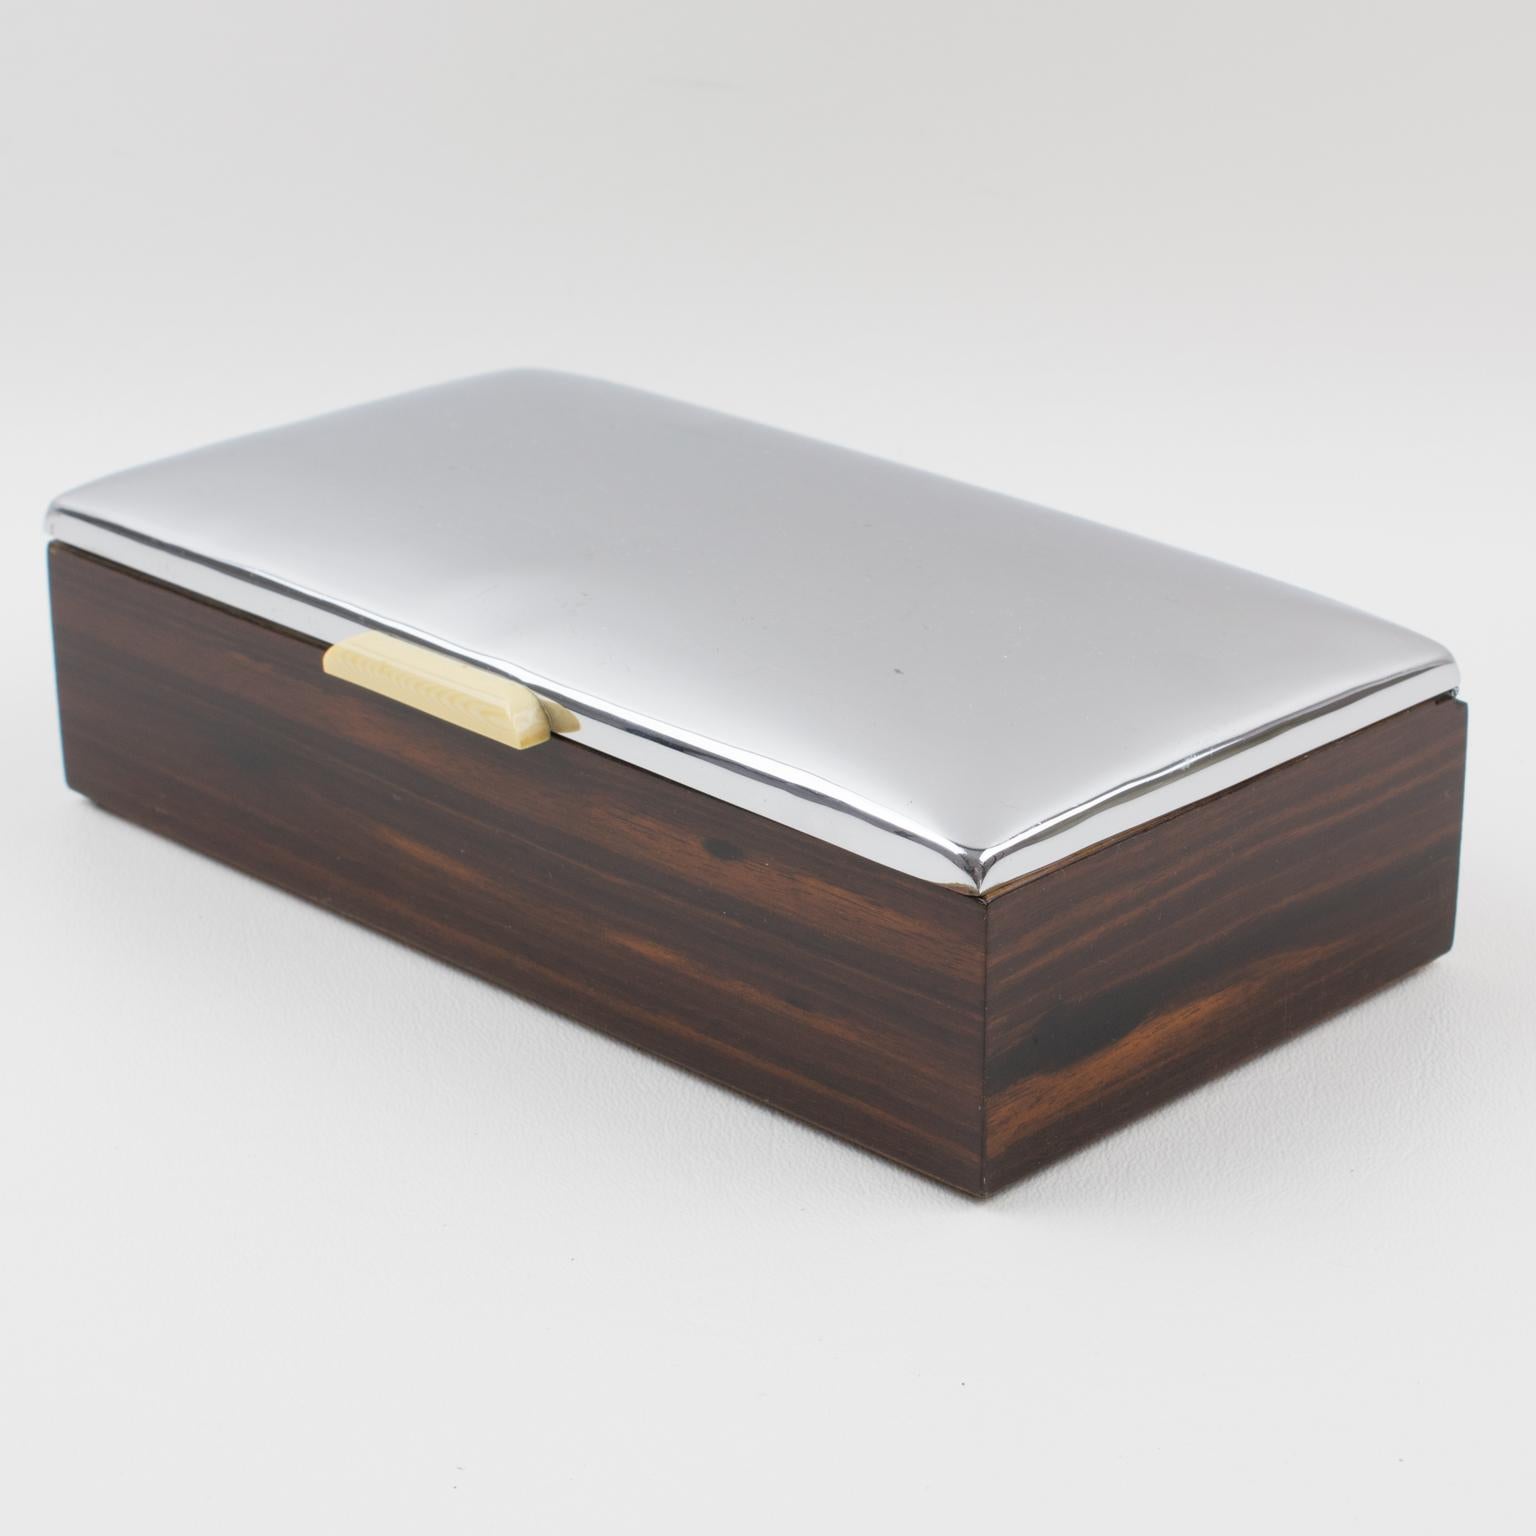 Stylish French Art Deco decorative lidded box. Domed chromed metal lid with a Macassar wood base. Interior in tropical wood. An off-white Galalith handle is on the front. Marked underside: 